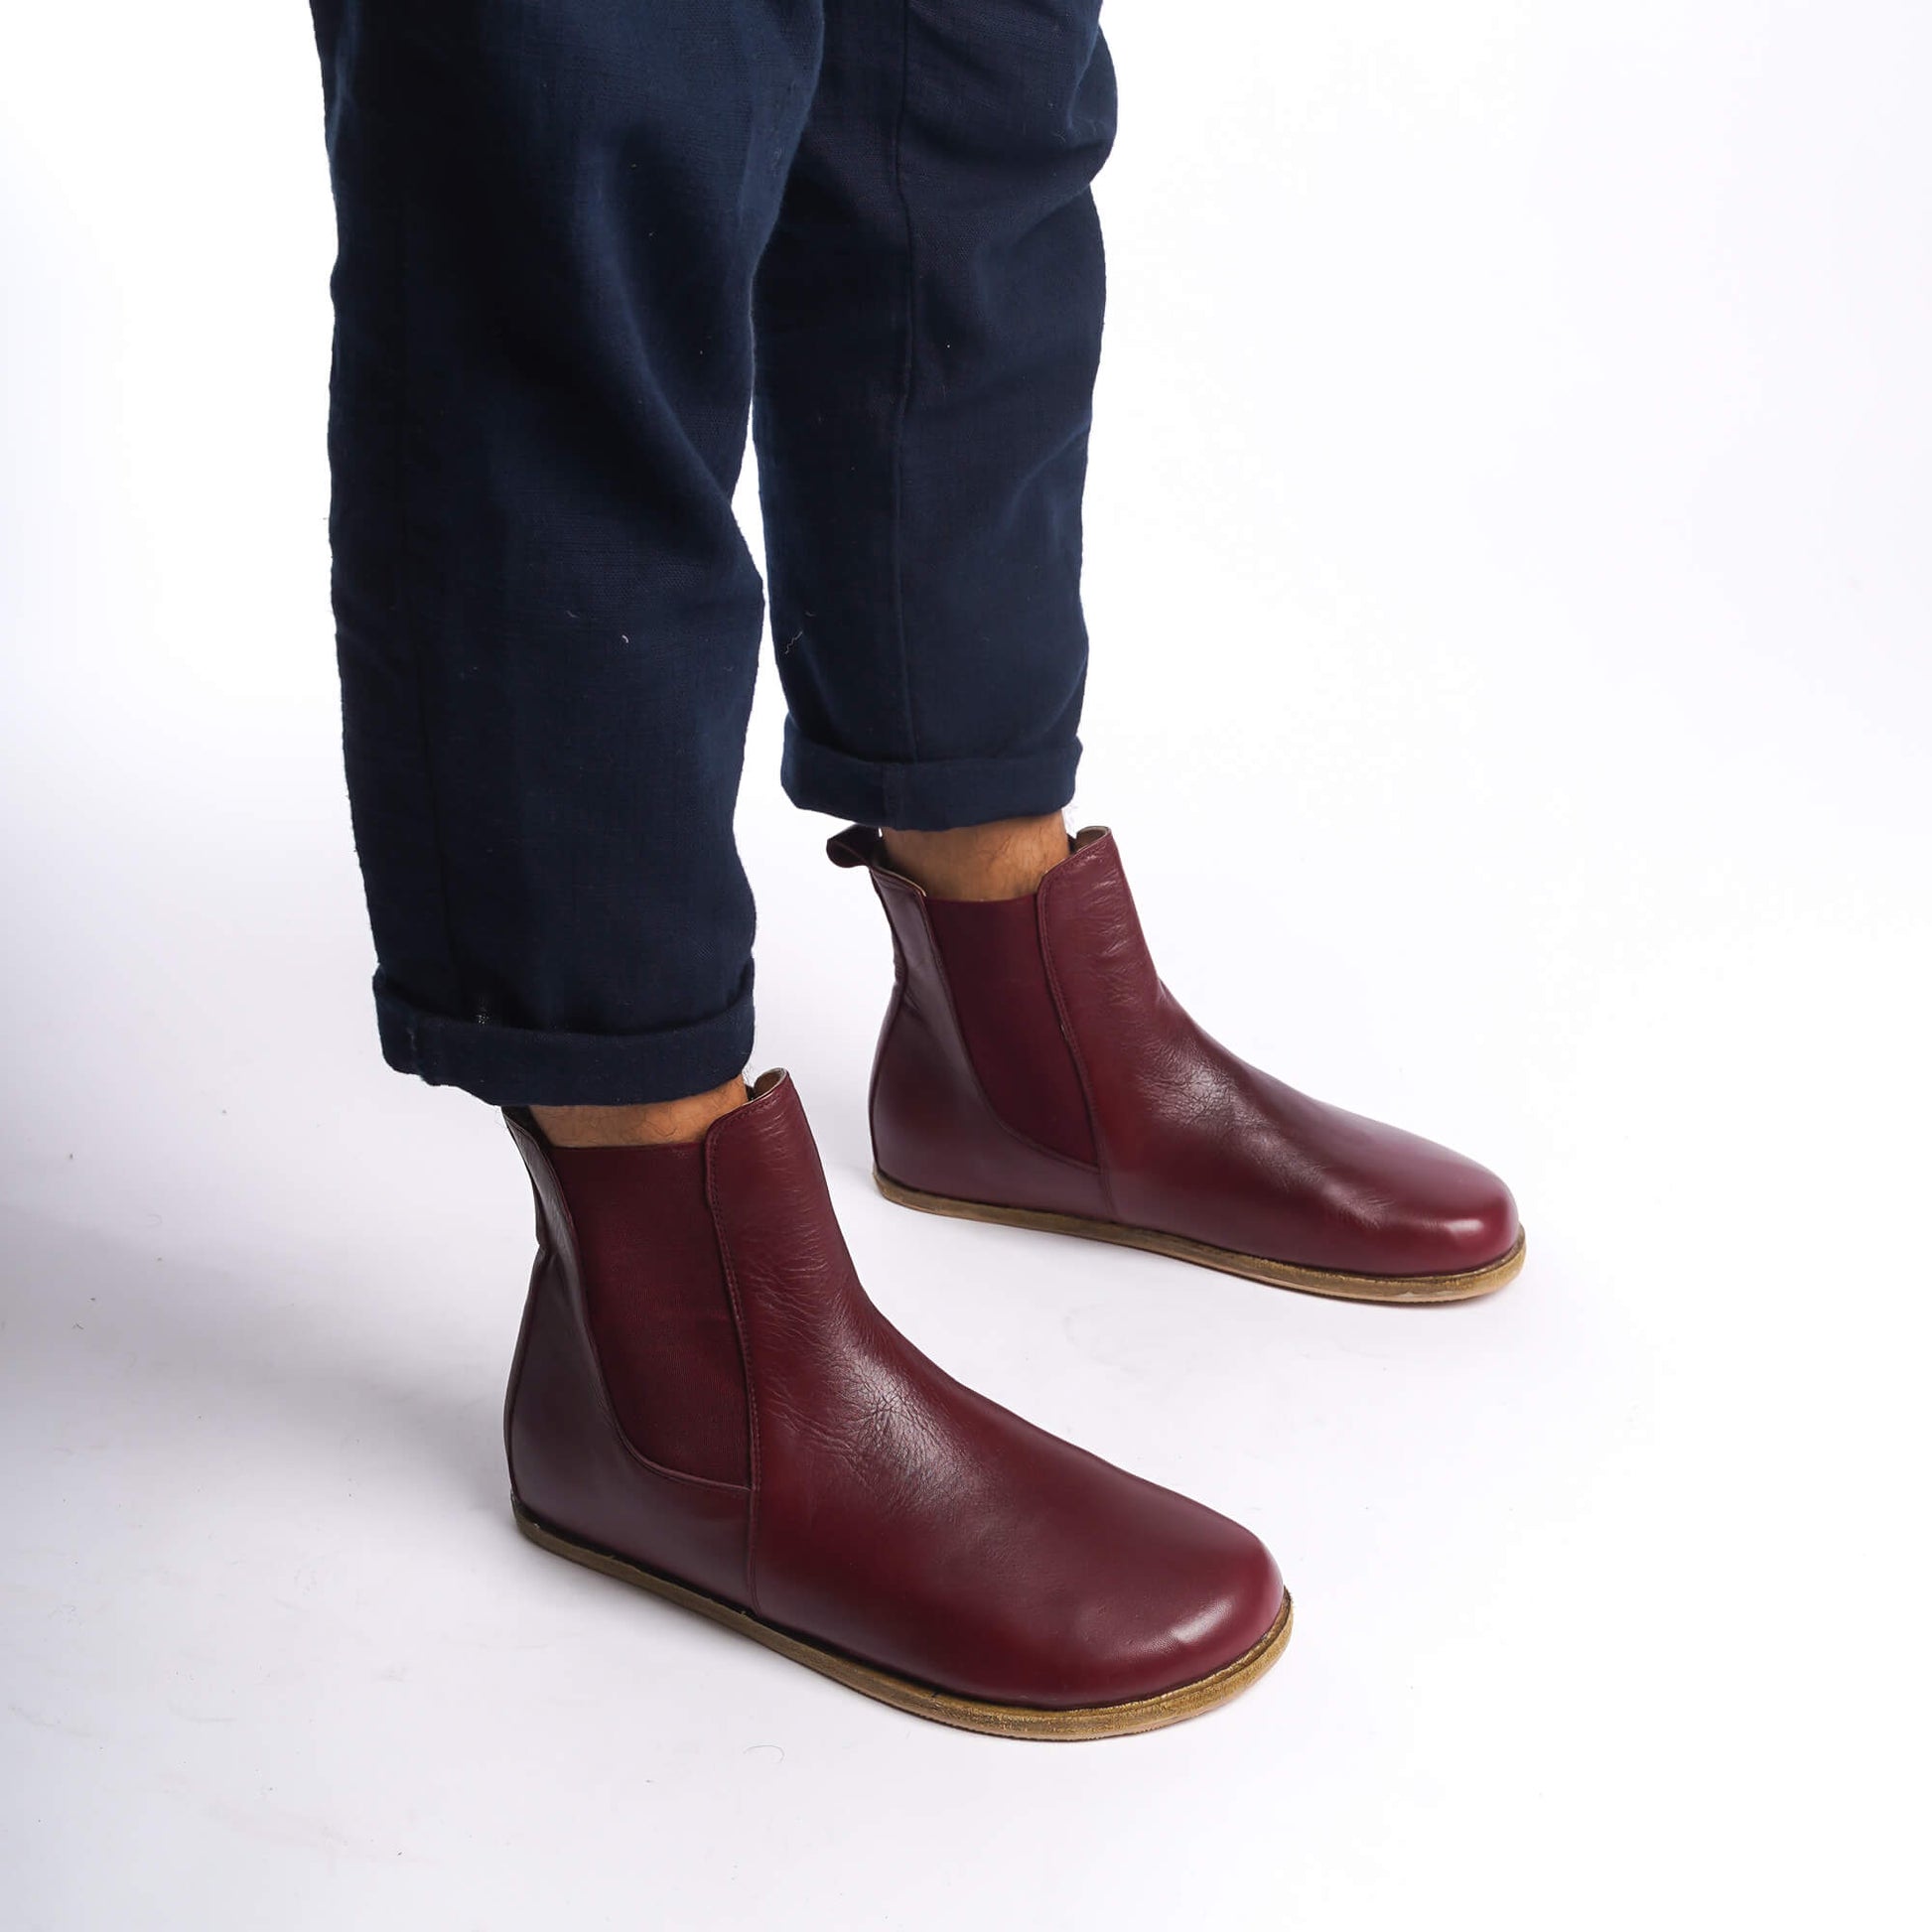 Side view of men's burgundy Chelsea boots, showcasing the minimalist design and rich leather material.Burgundy leather Chelsea boots for men, perfect for adding a touch of elegance to any outfit, with a slip-on design.